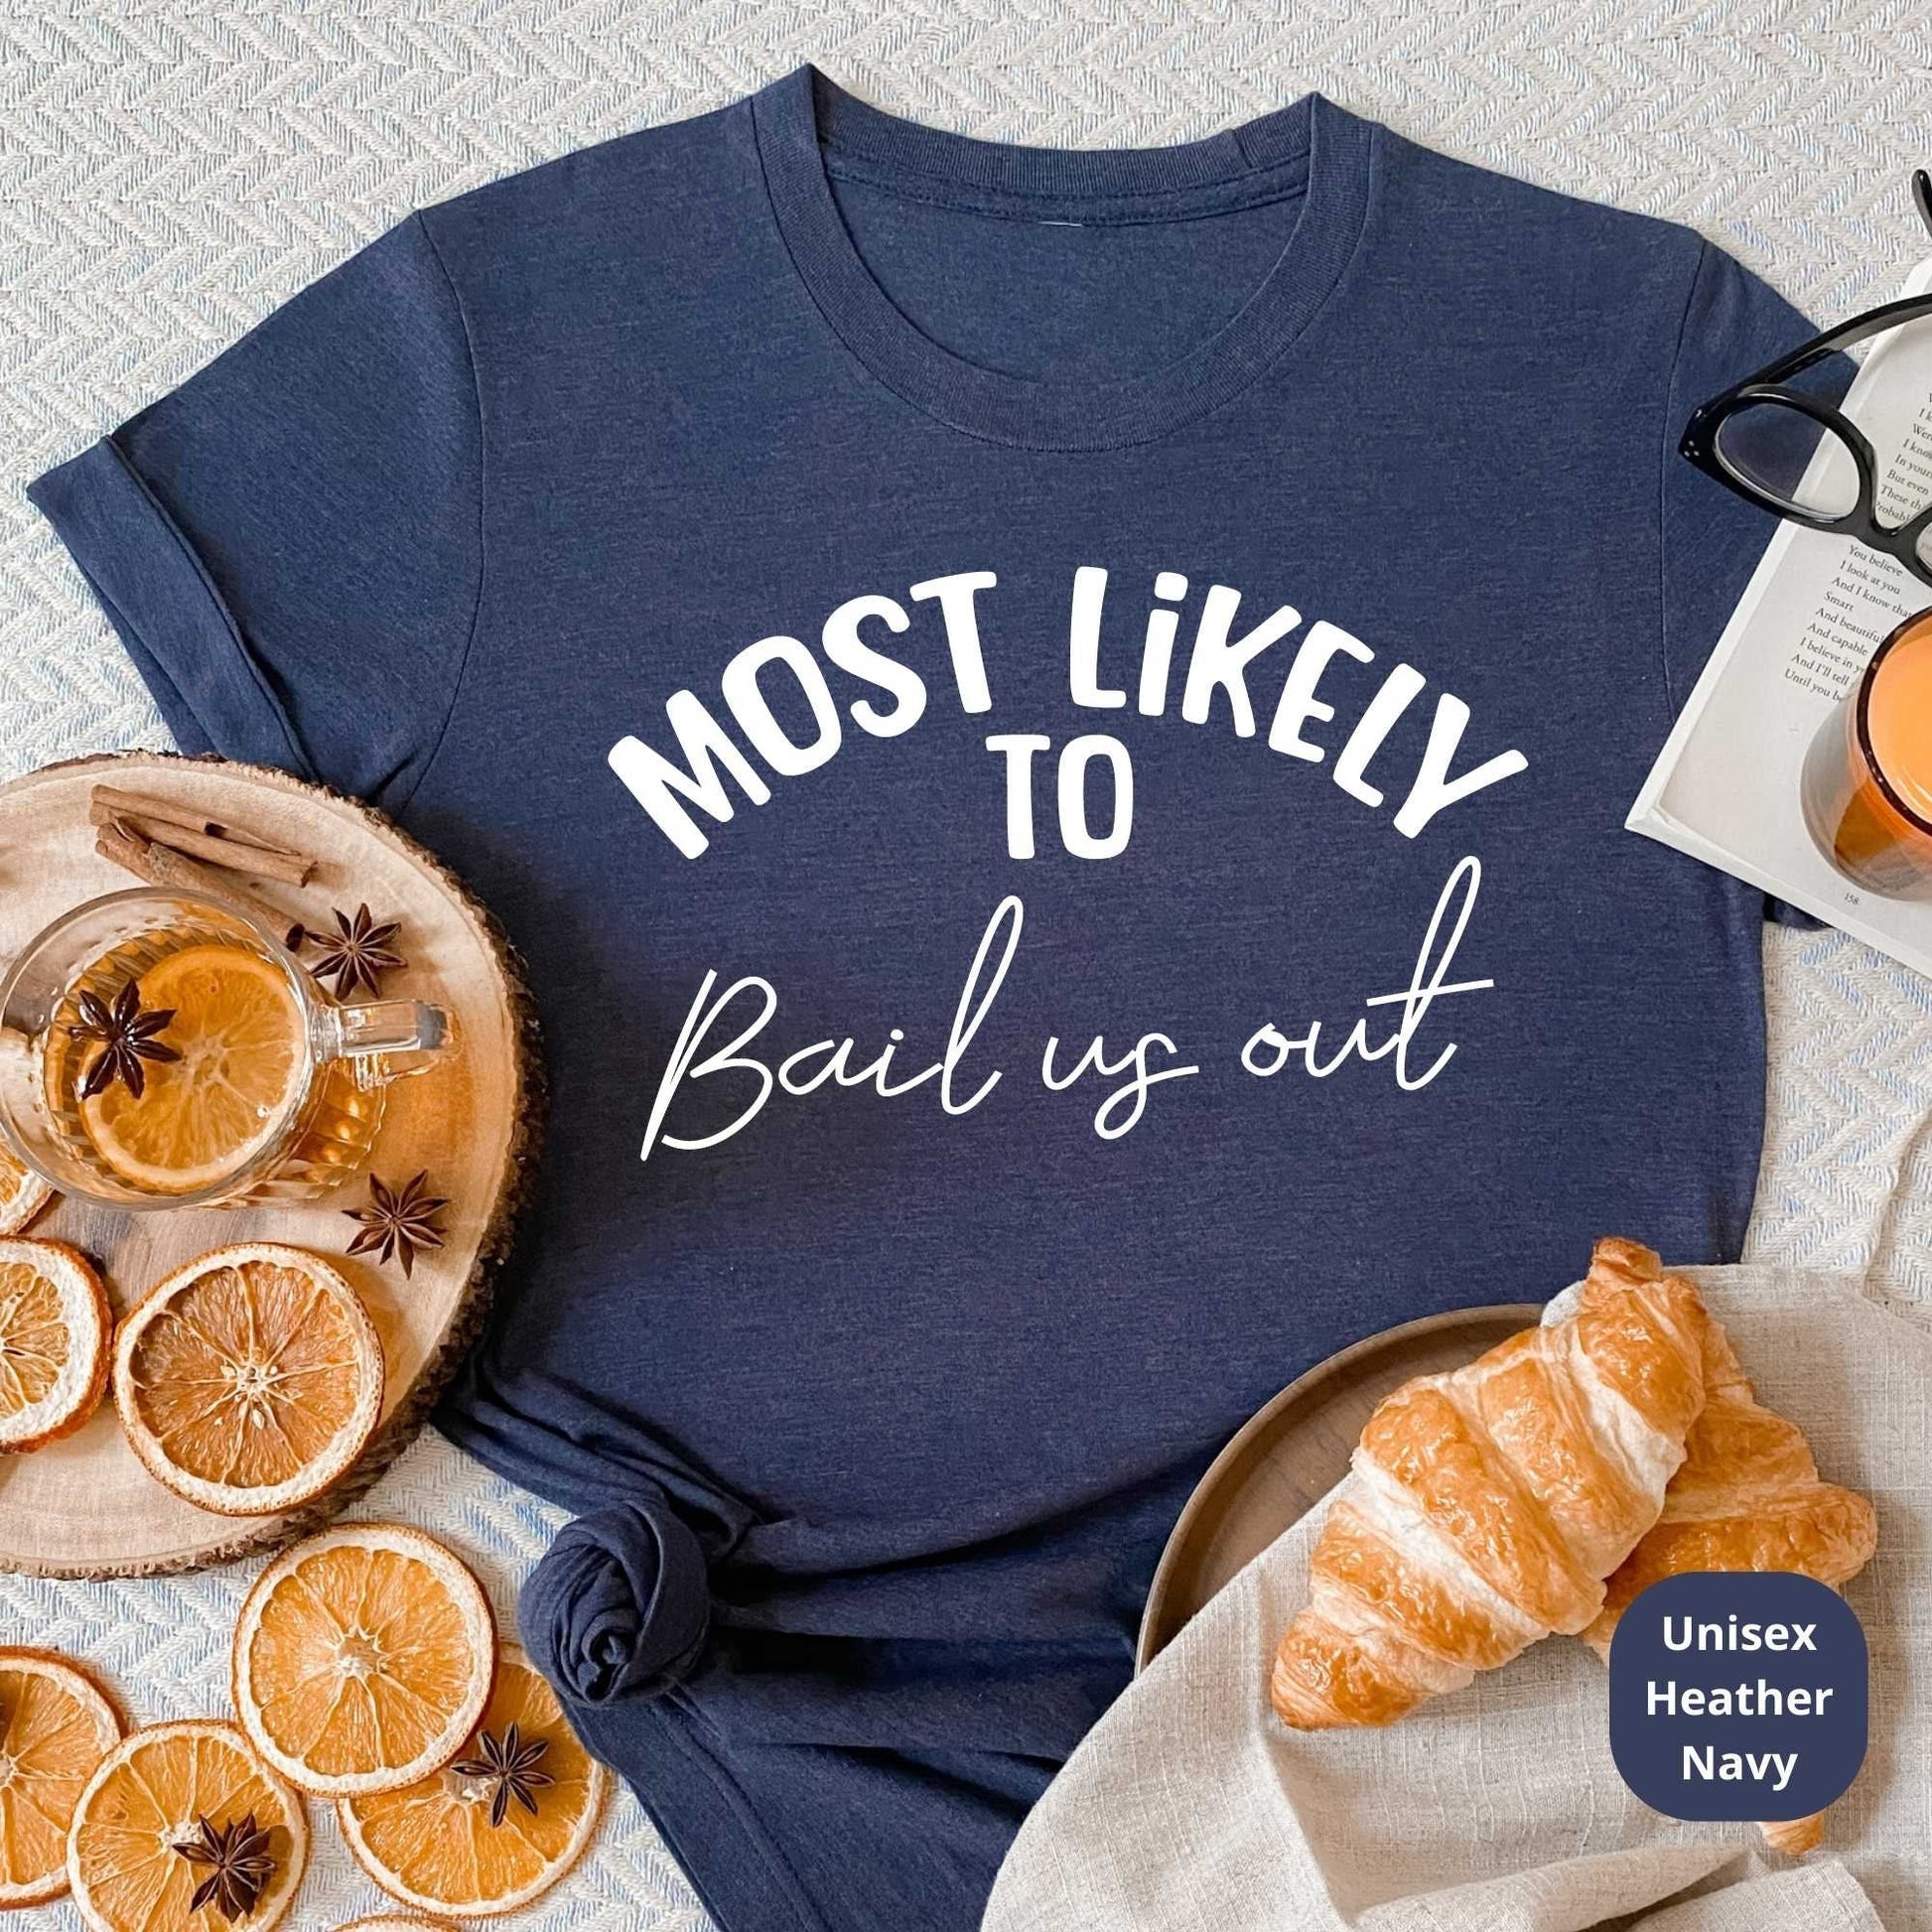 Most Likely To Shirts, Bachelorette Party Shirts, Bachelors Party Shirts